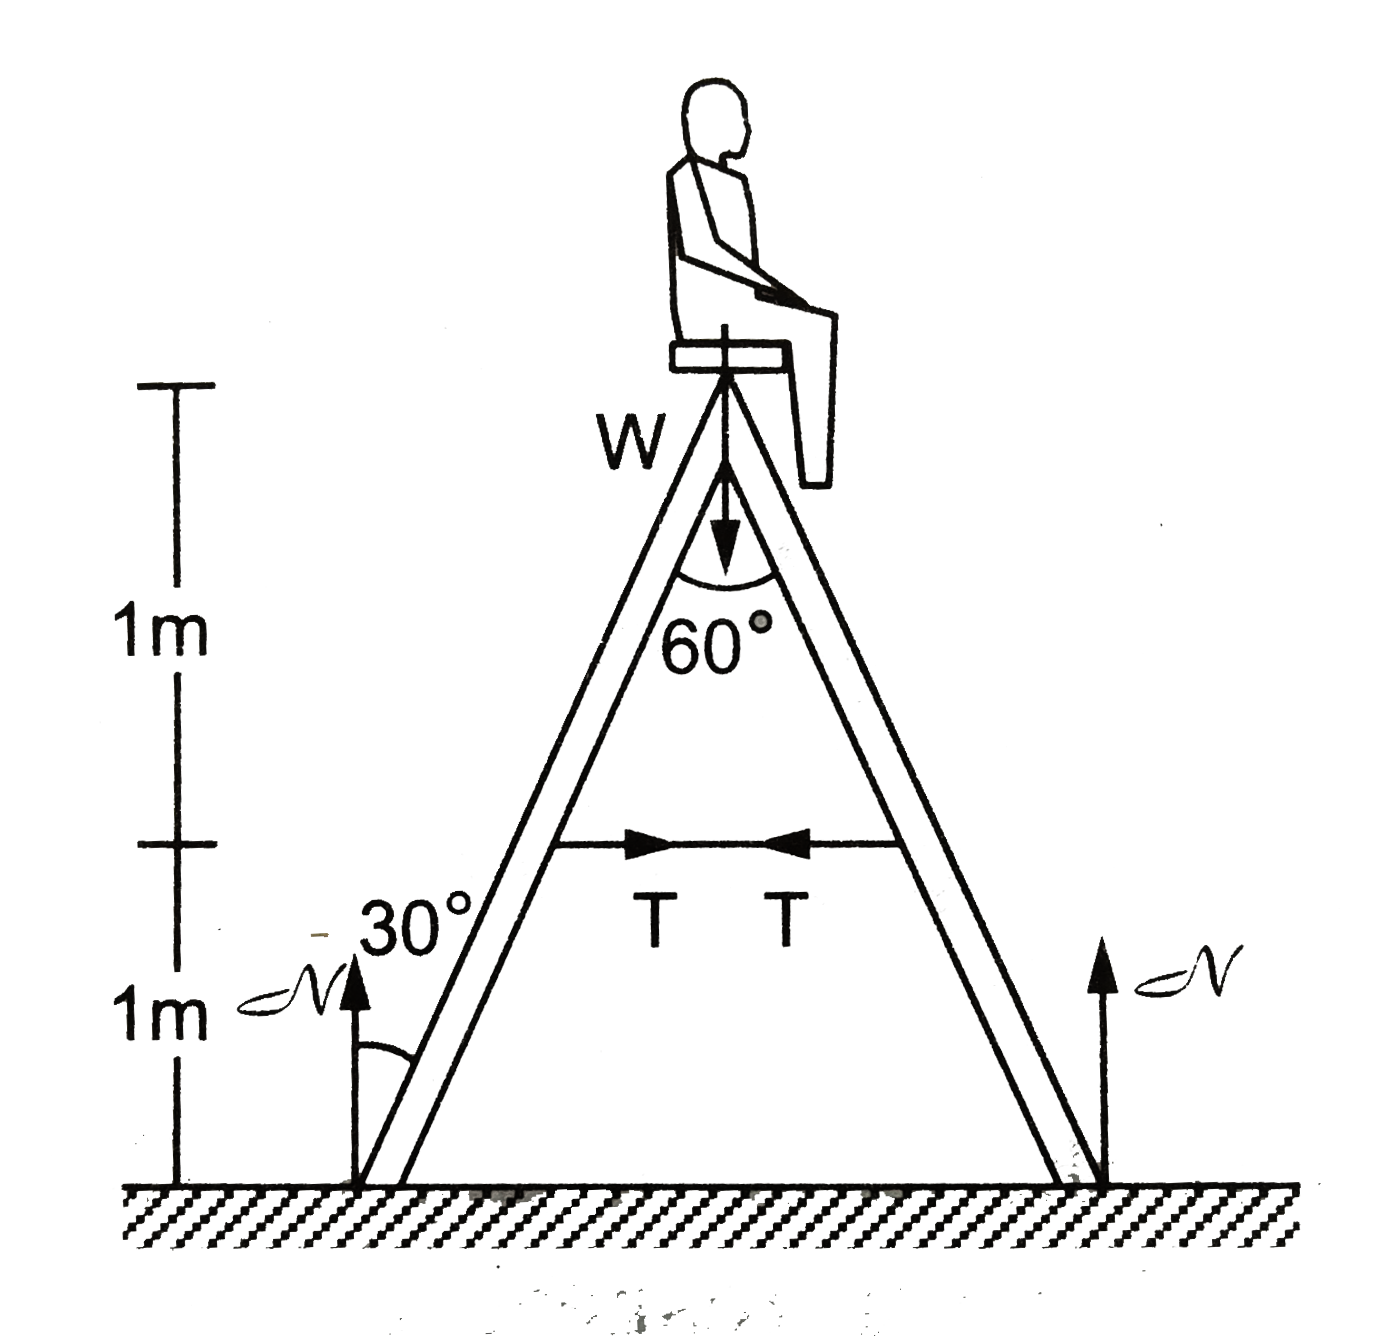 The ladder shown in figure has negligible mass and rests on a frictionless floor. The crossbar connects the two legs of the ladder at the middle. The angle between the two legs is 60^0. The fat person sitting on the ladder has a mas of 80 kg. Find the contact force exerted by the floor on each leg and the tension in the cross bar.